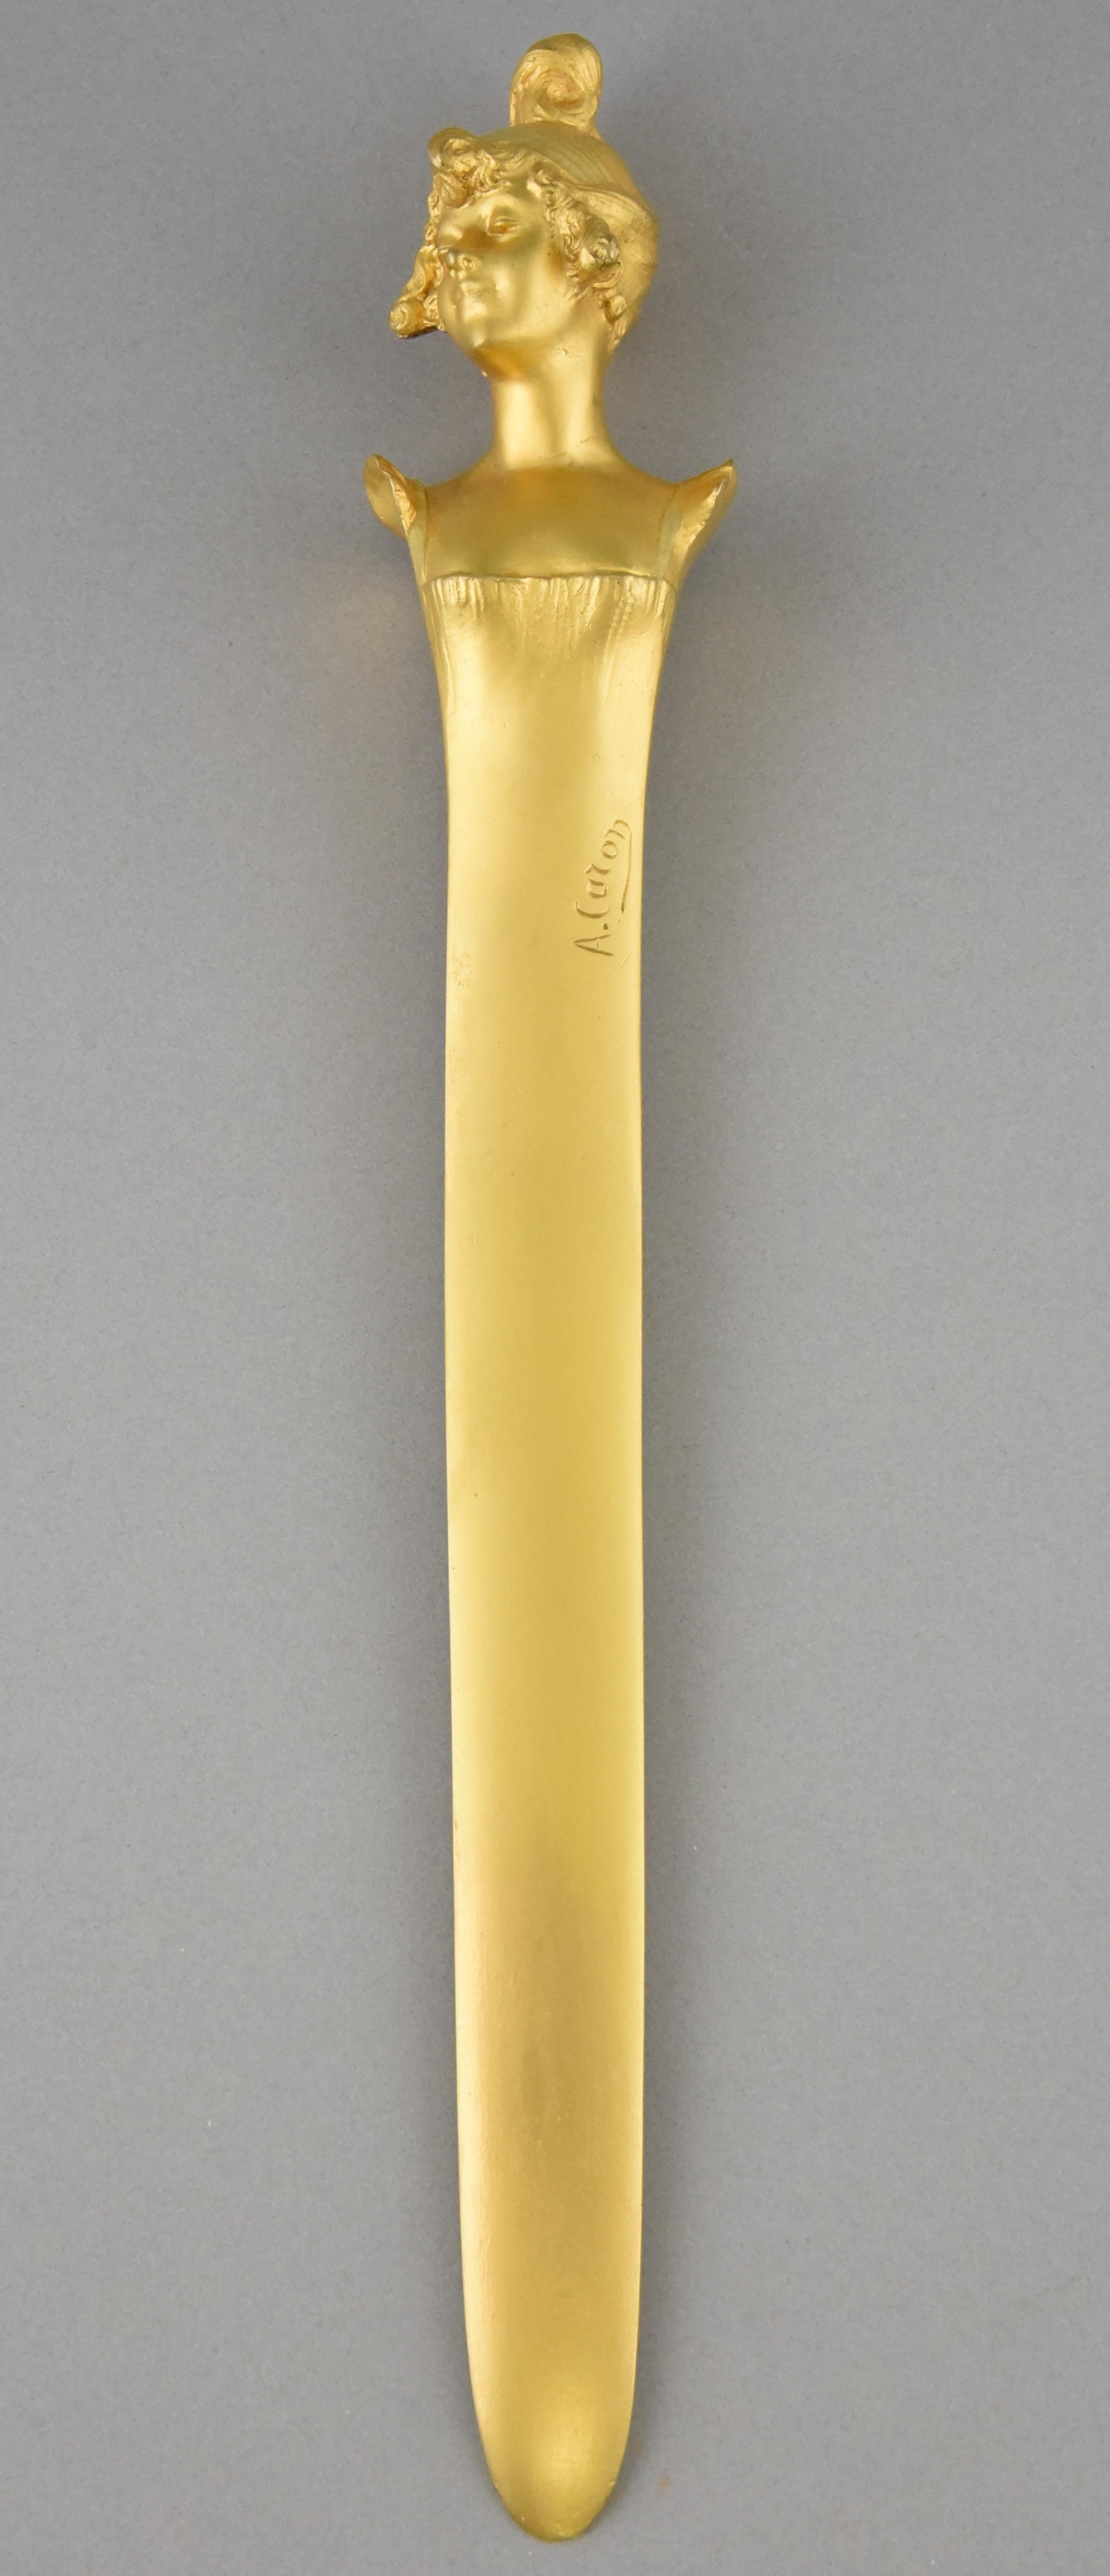 Early 20th Century Art Nouveau Gilt Bronze Letter Opener with Lady Alexandre Auguste Caron 1900